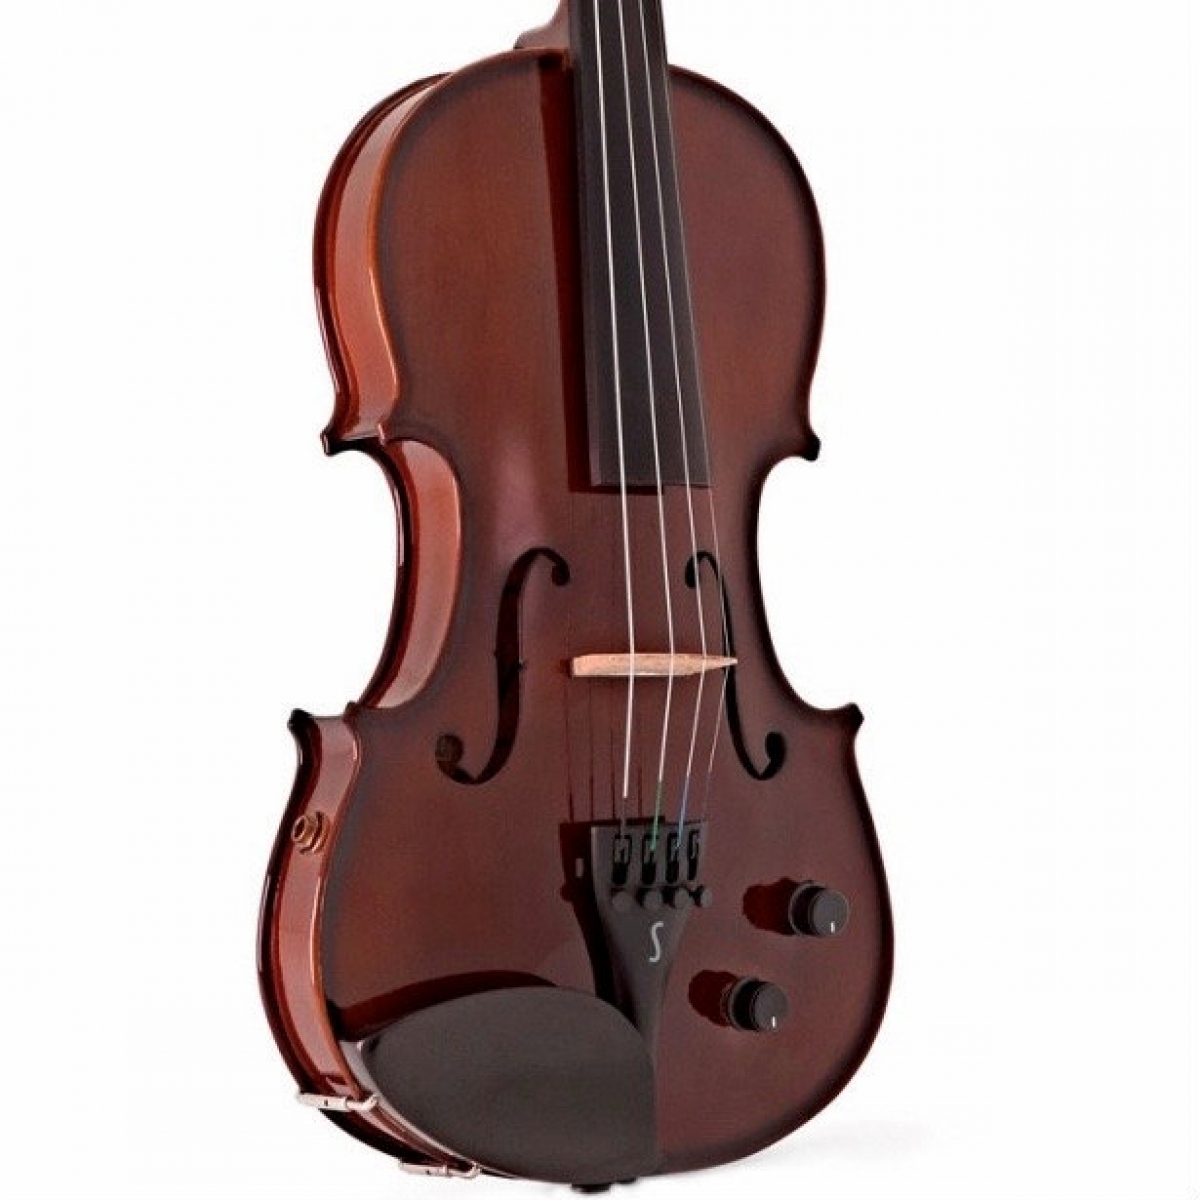 Stentor　Student　Acoustic　Electric　#1500AE　4/4　Outfit　Promenade　Size　Violin　Music